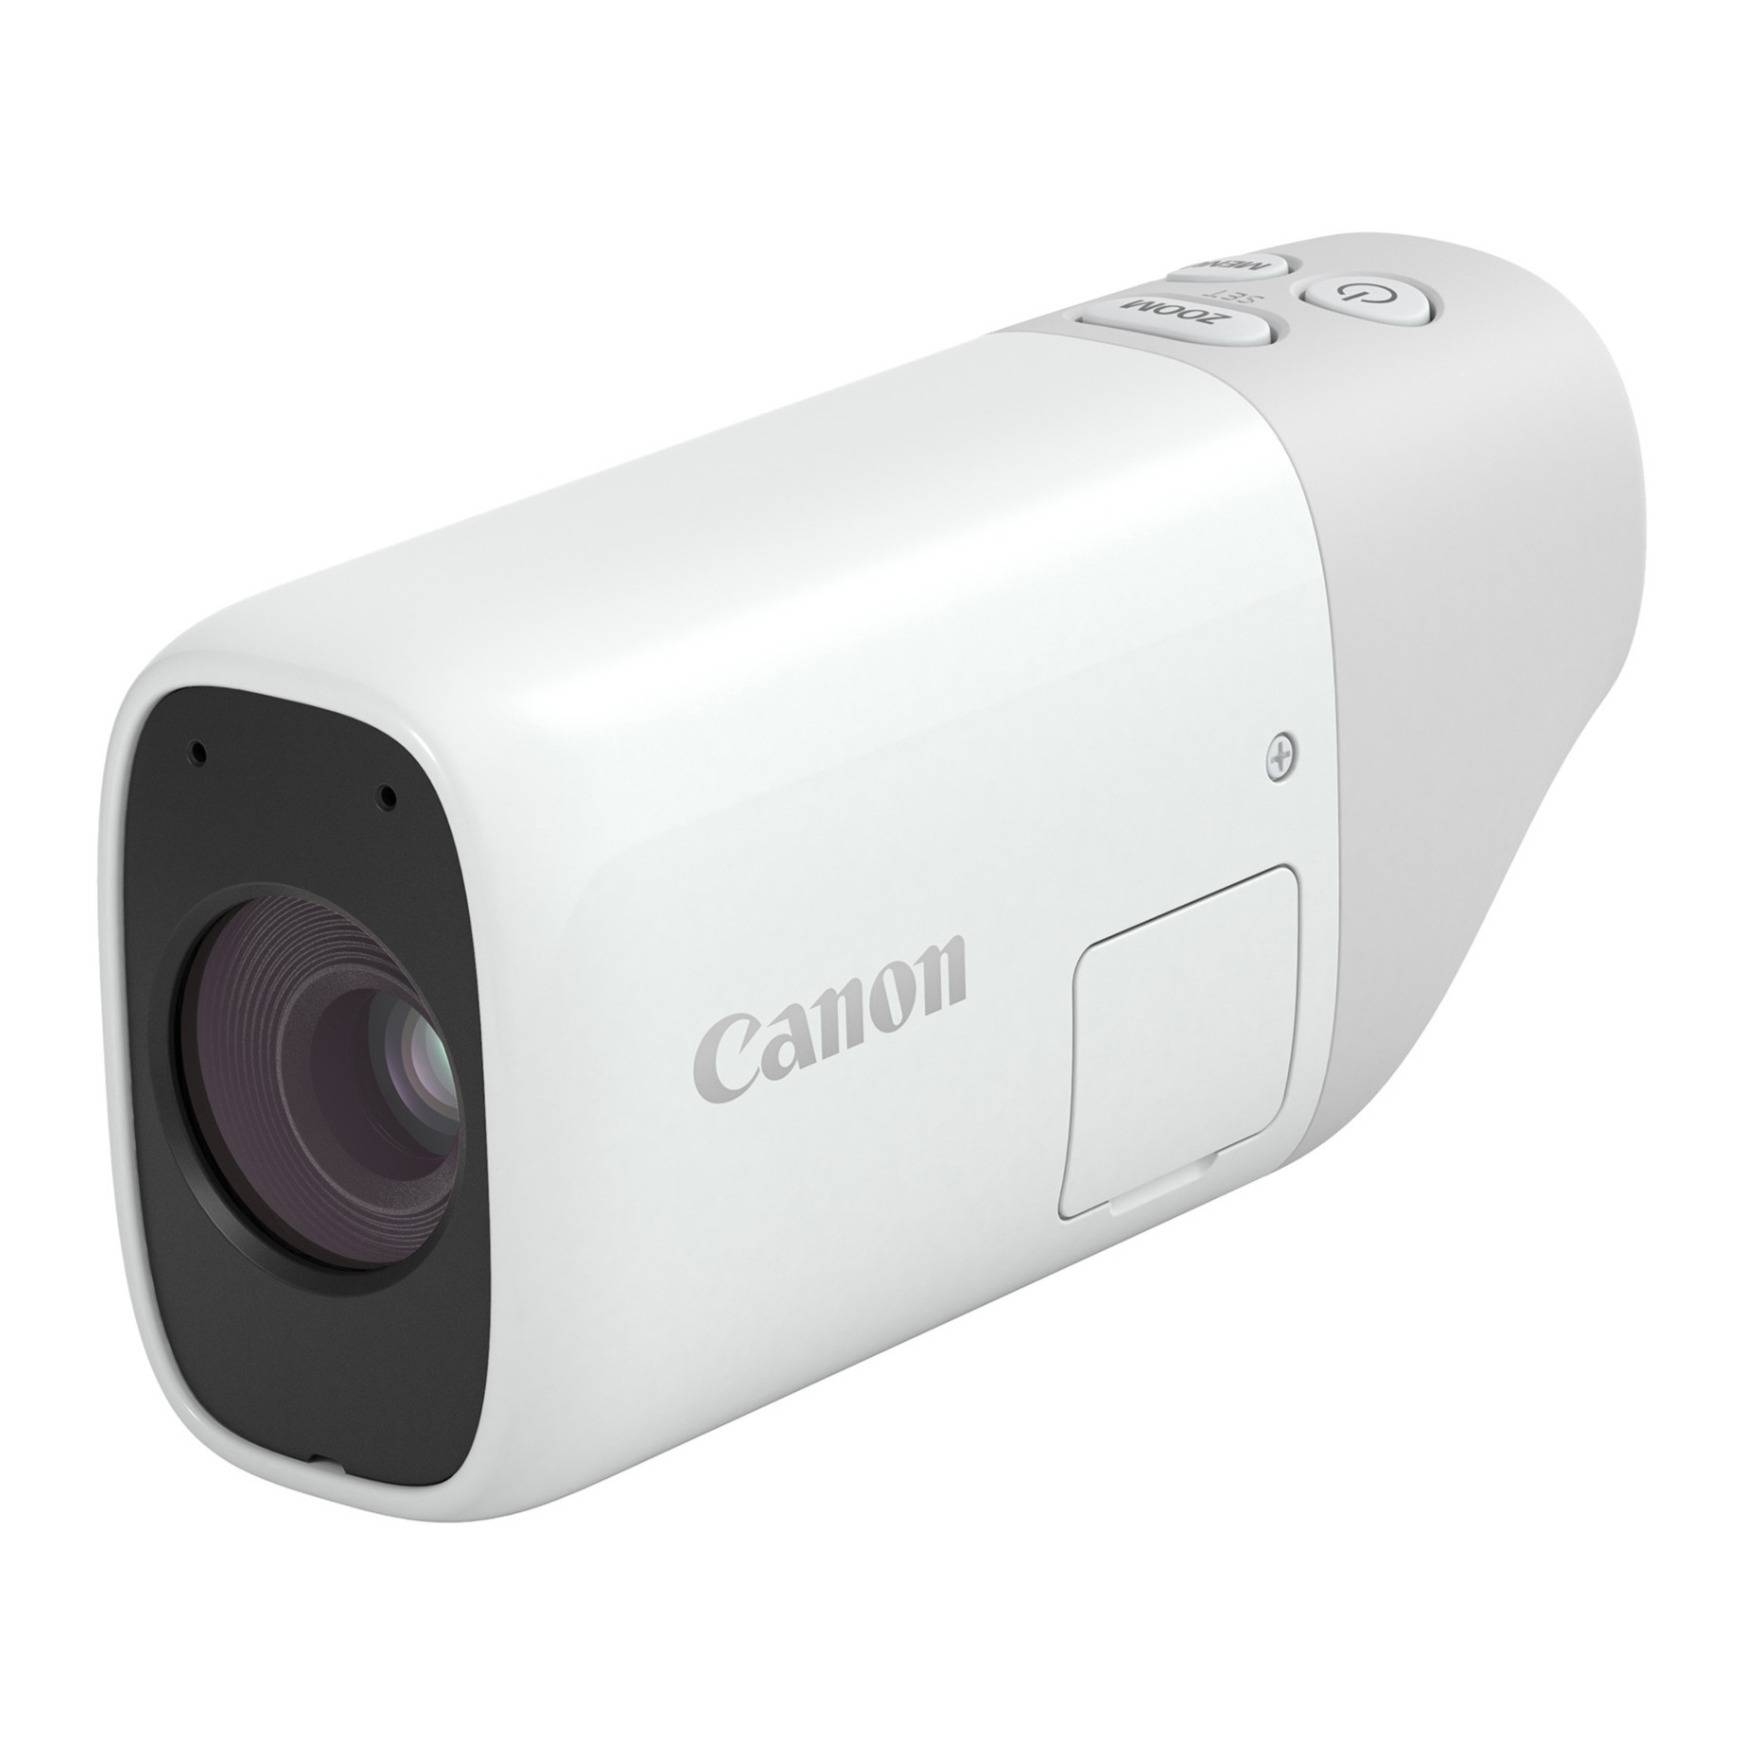 Canon ZOOM Digital Monocular with USB Charger and microSD Card (White)